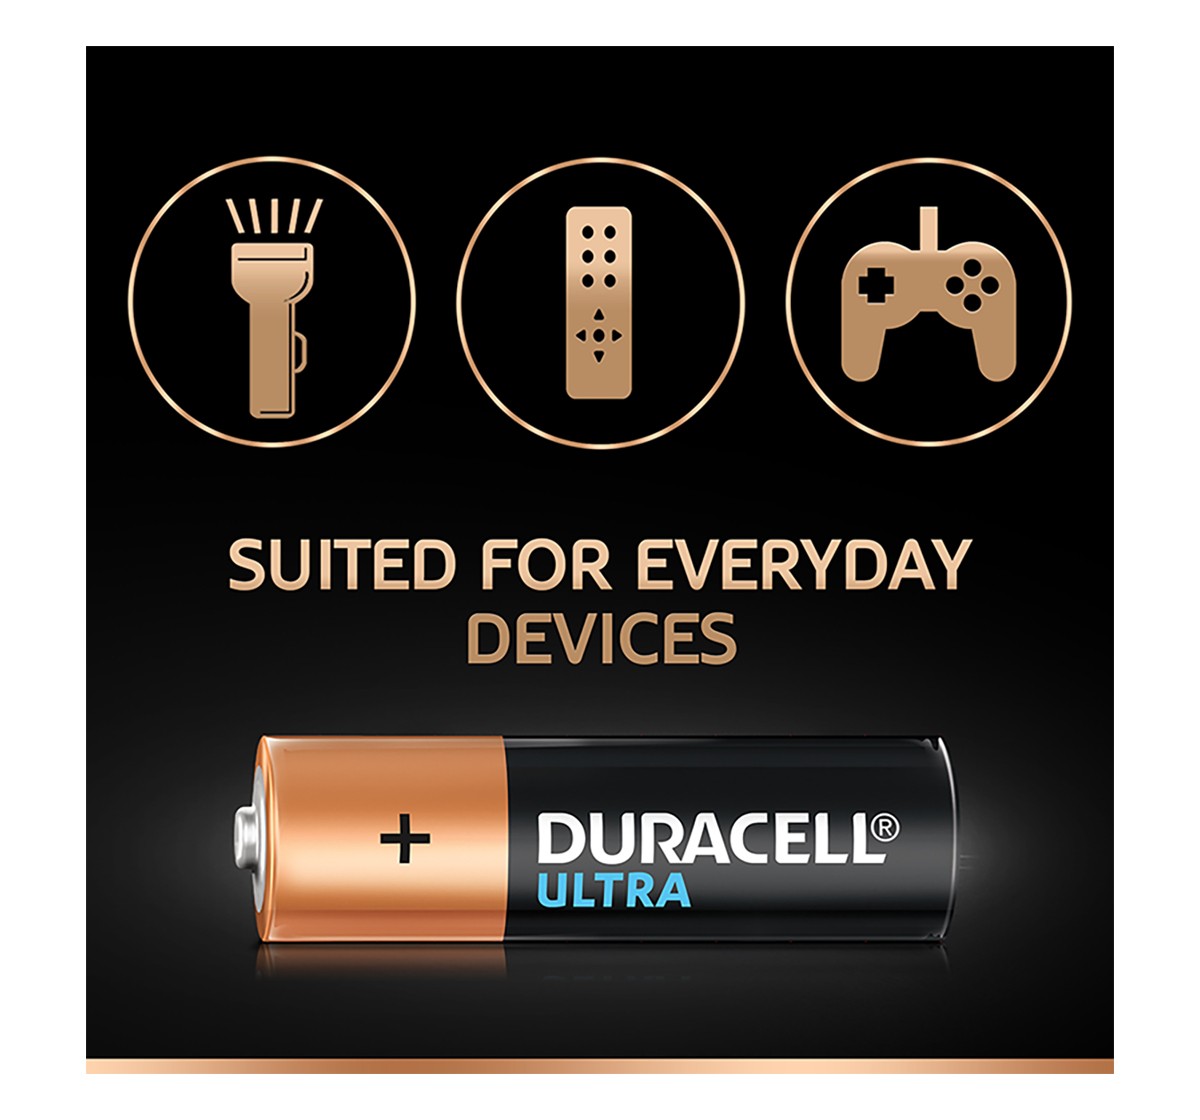 Duracell Alkaline AA Batteries - Pack of 4 Essentials for Kids age 3Y+ 